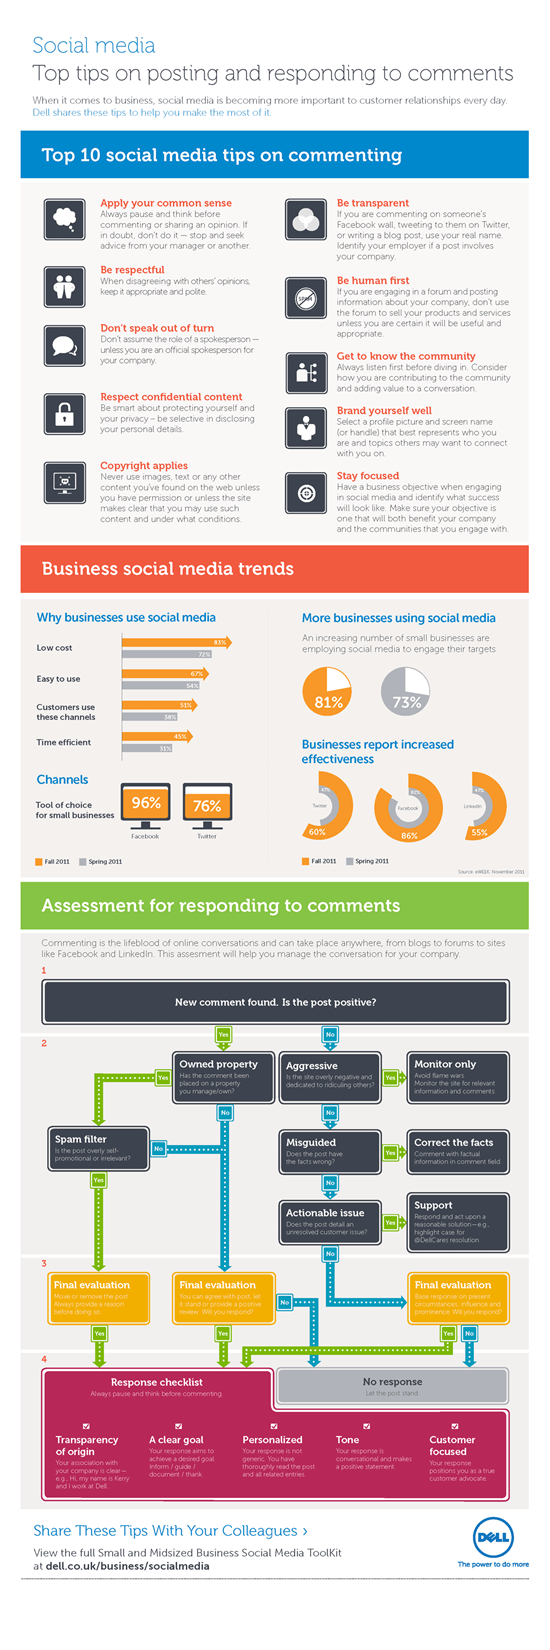 This infographic contains insights from the social media toolkit